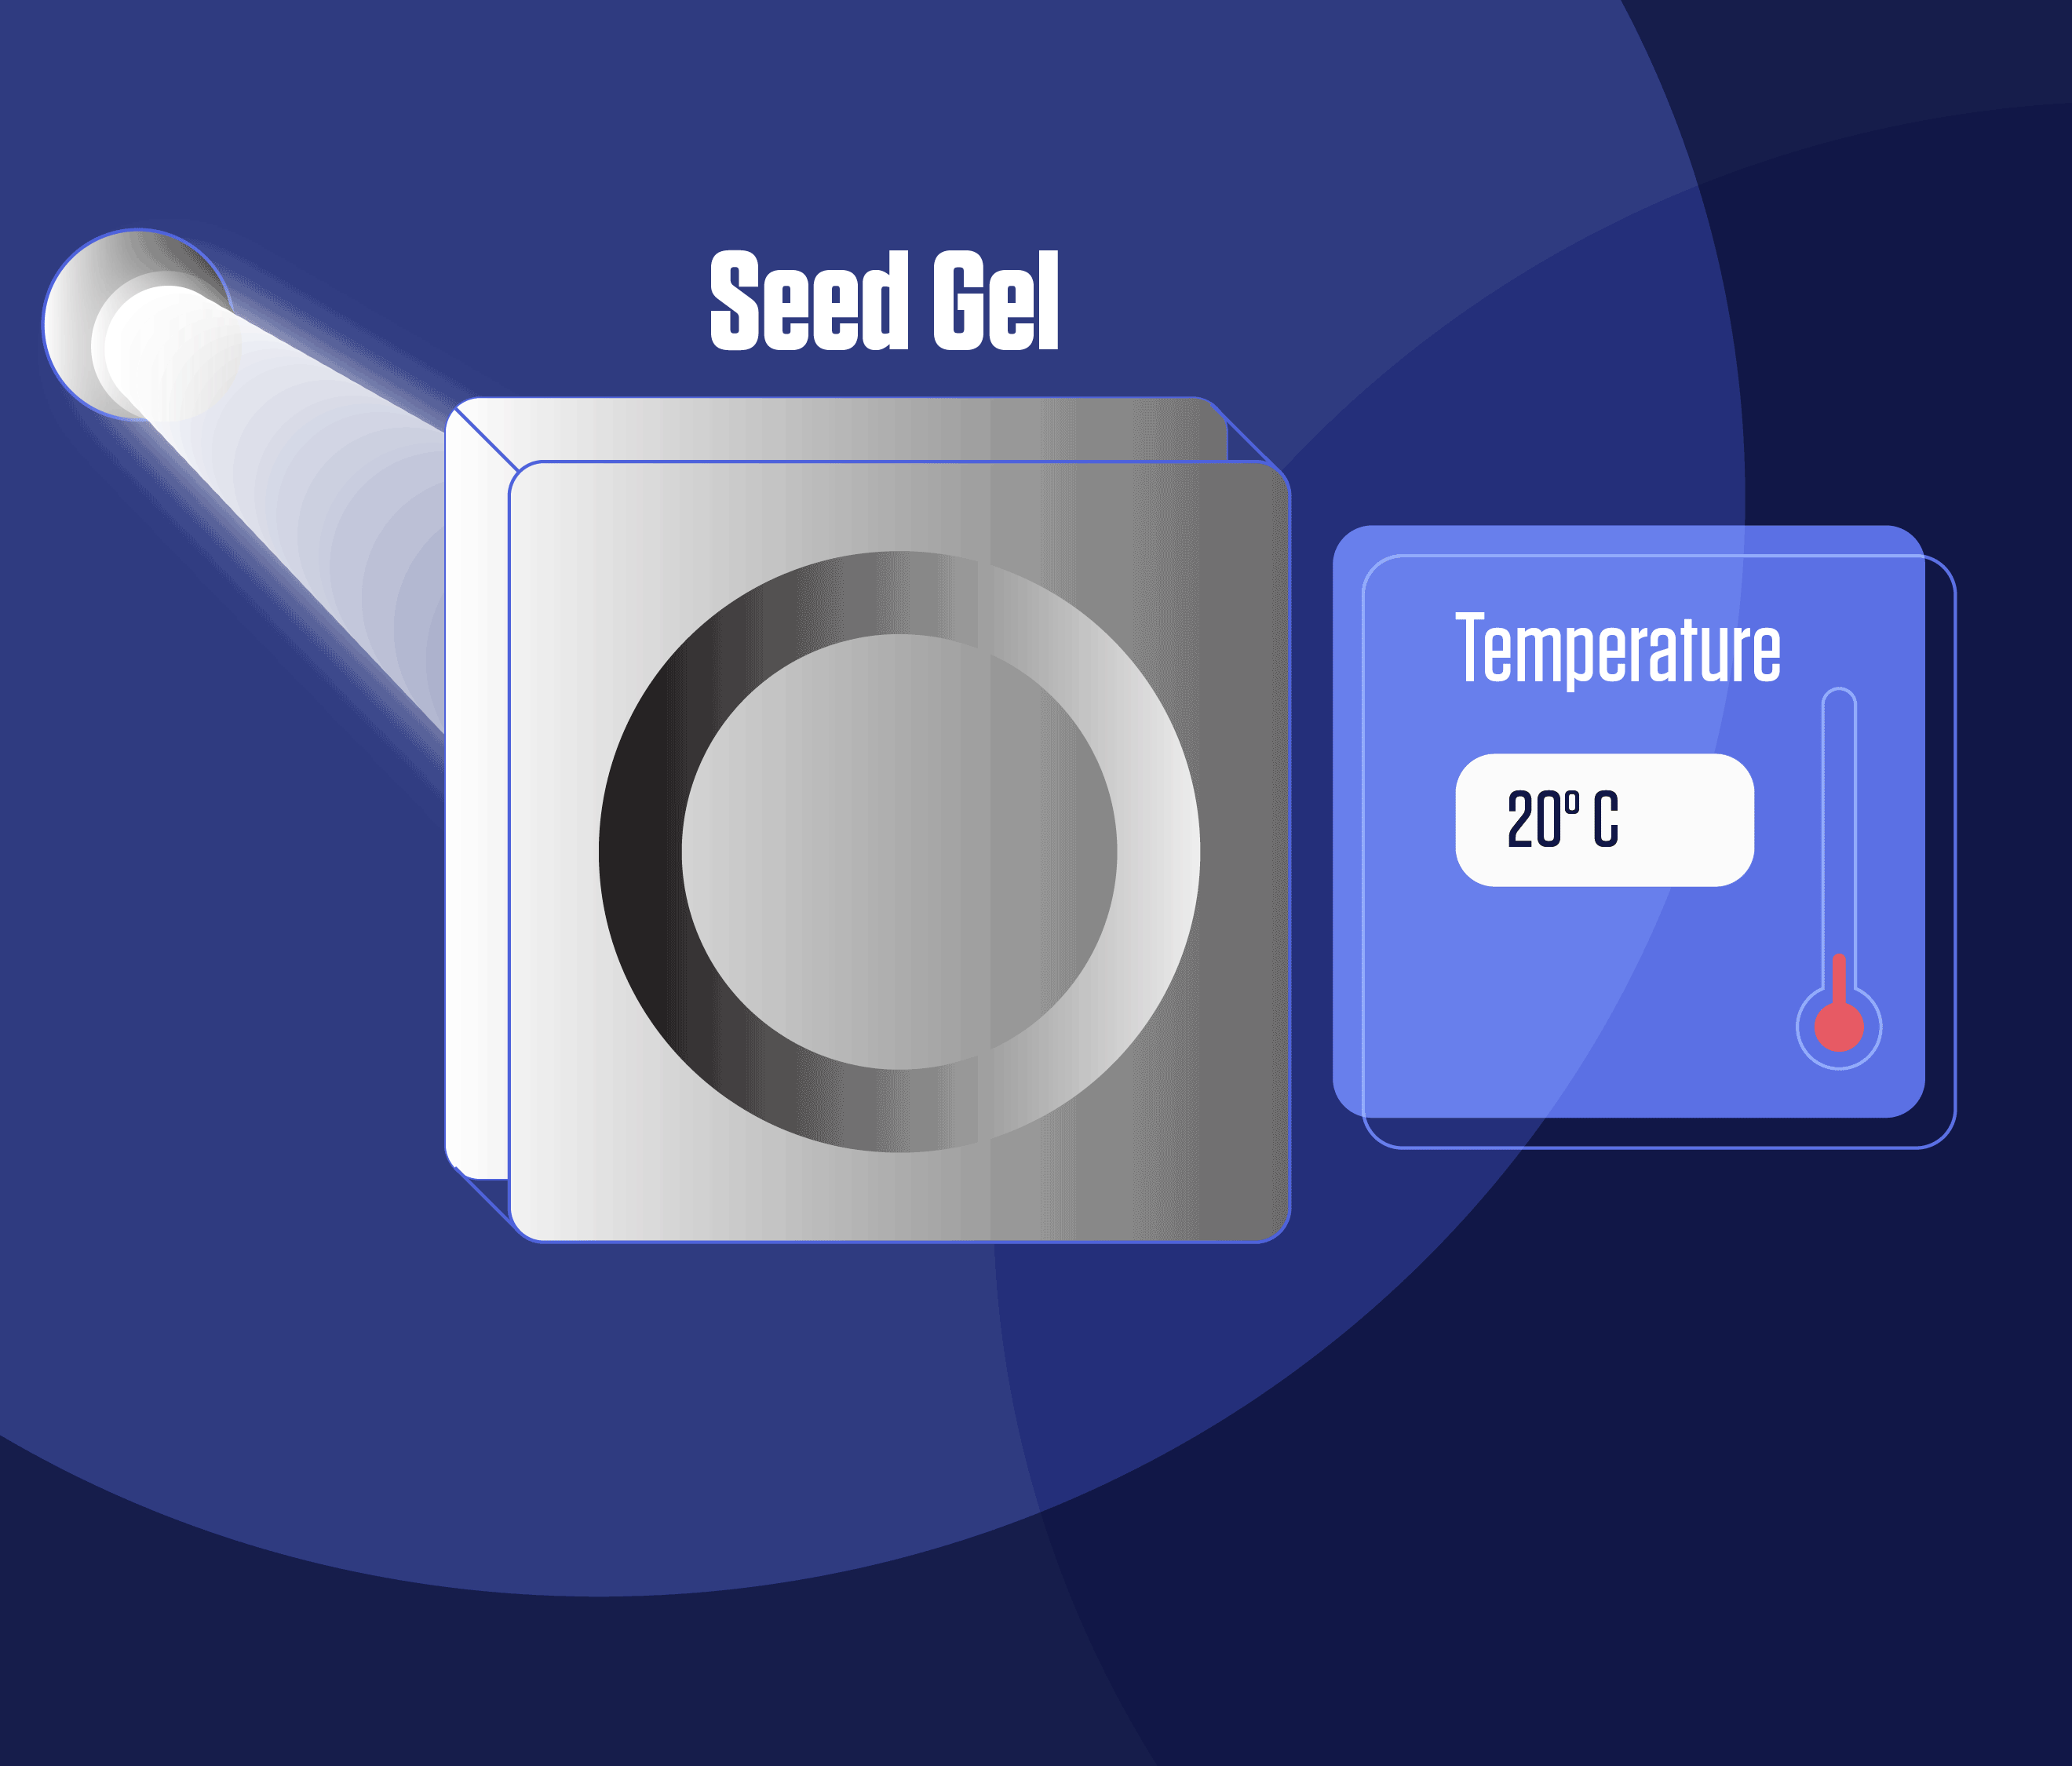 Animated illustration shows SeedGel in circular frame changing color as temperature indicator goes up and down